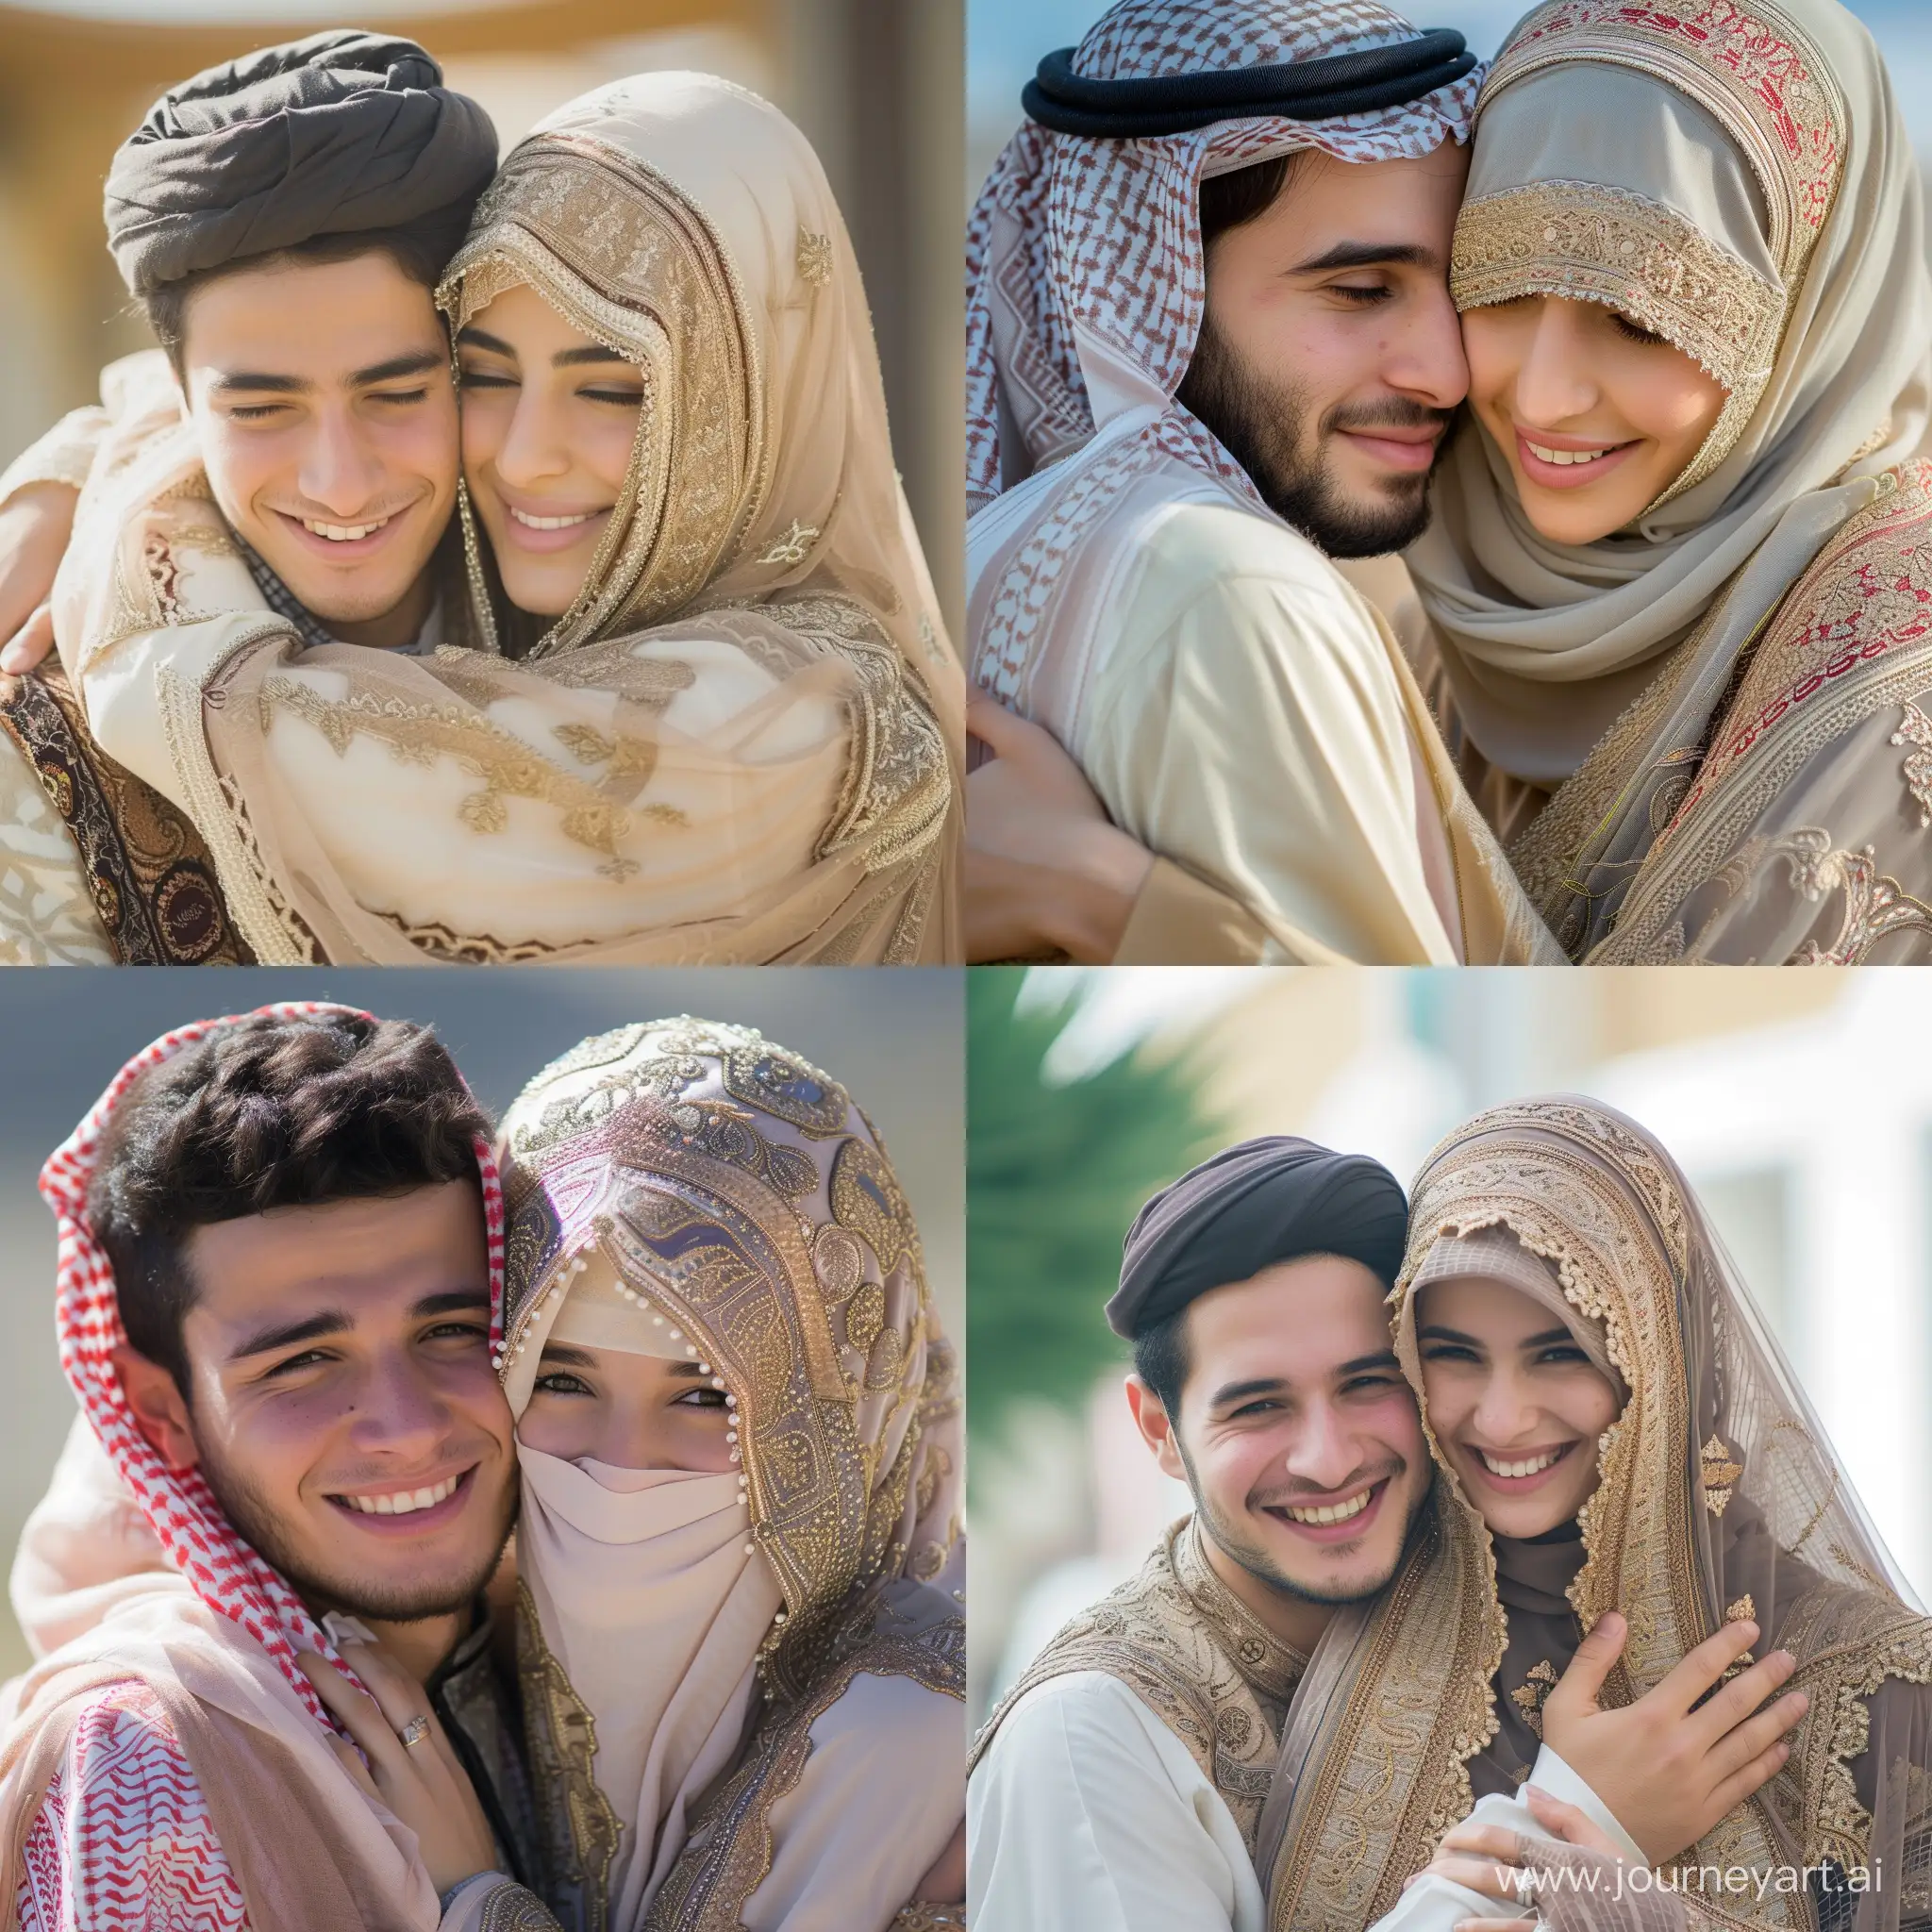 Real and natural photo of a young man in Arabic clothes embracing a fully veiled Arab woman. They both smile. Both are beautiful. The details of the faces are clear. --v 6 --ar 1:1 --no 96092